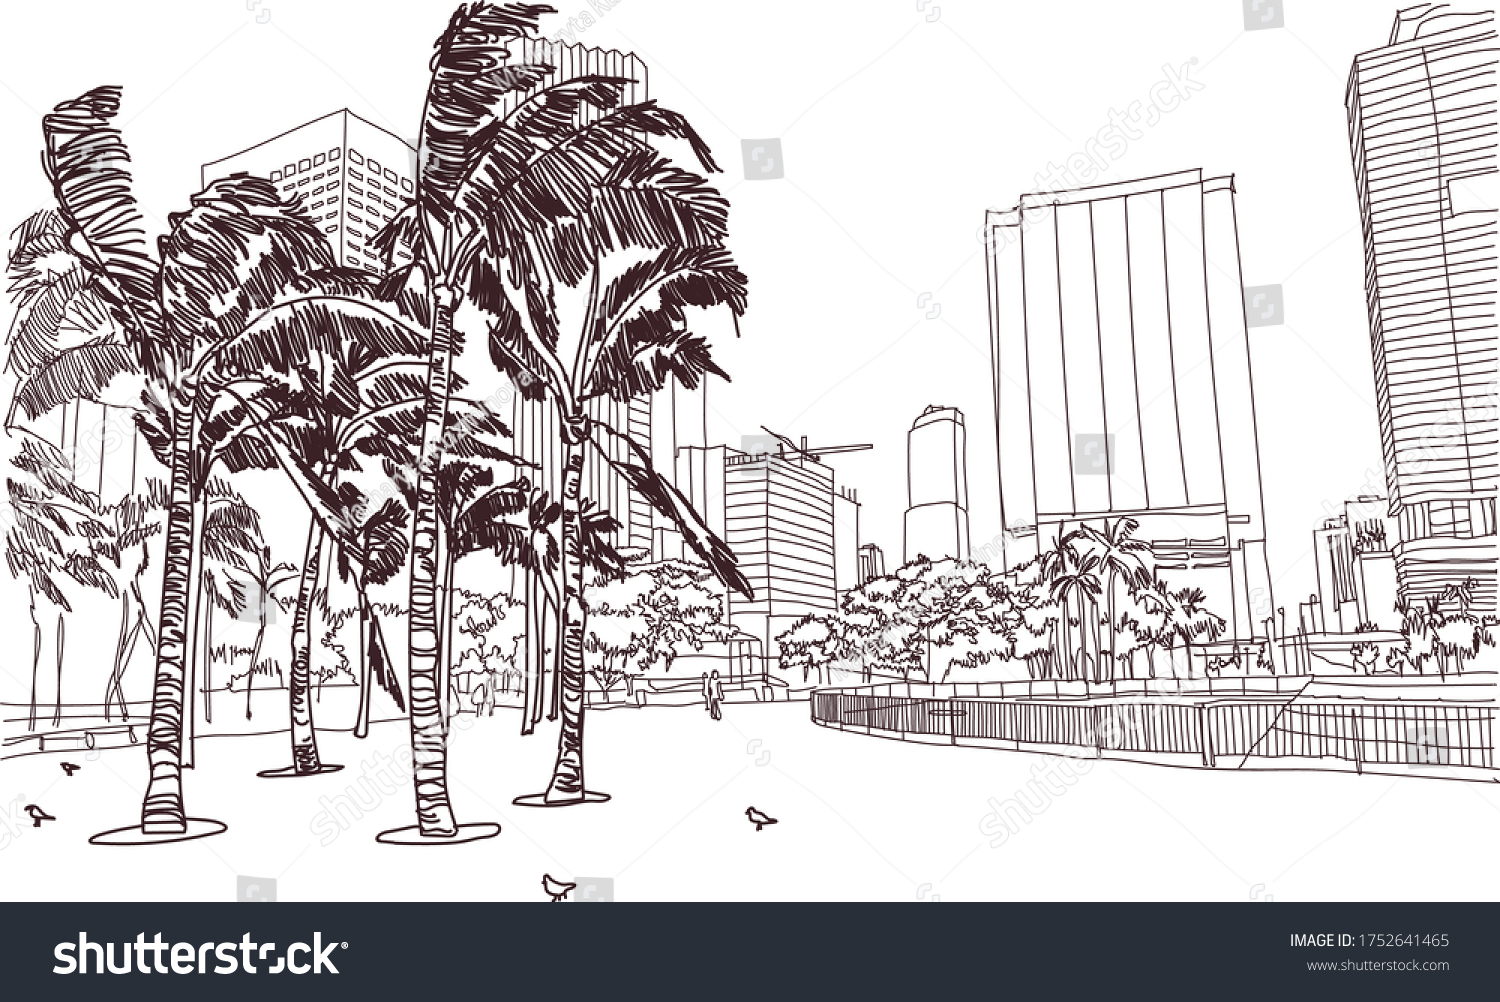 Miami skyline drawing Images, Stock Photos & Vectors Shutterstock